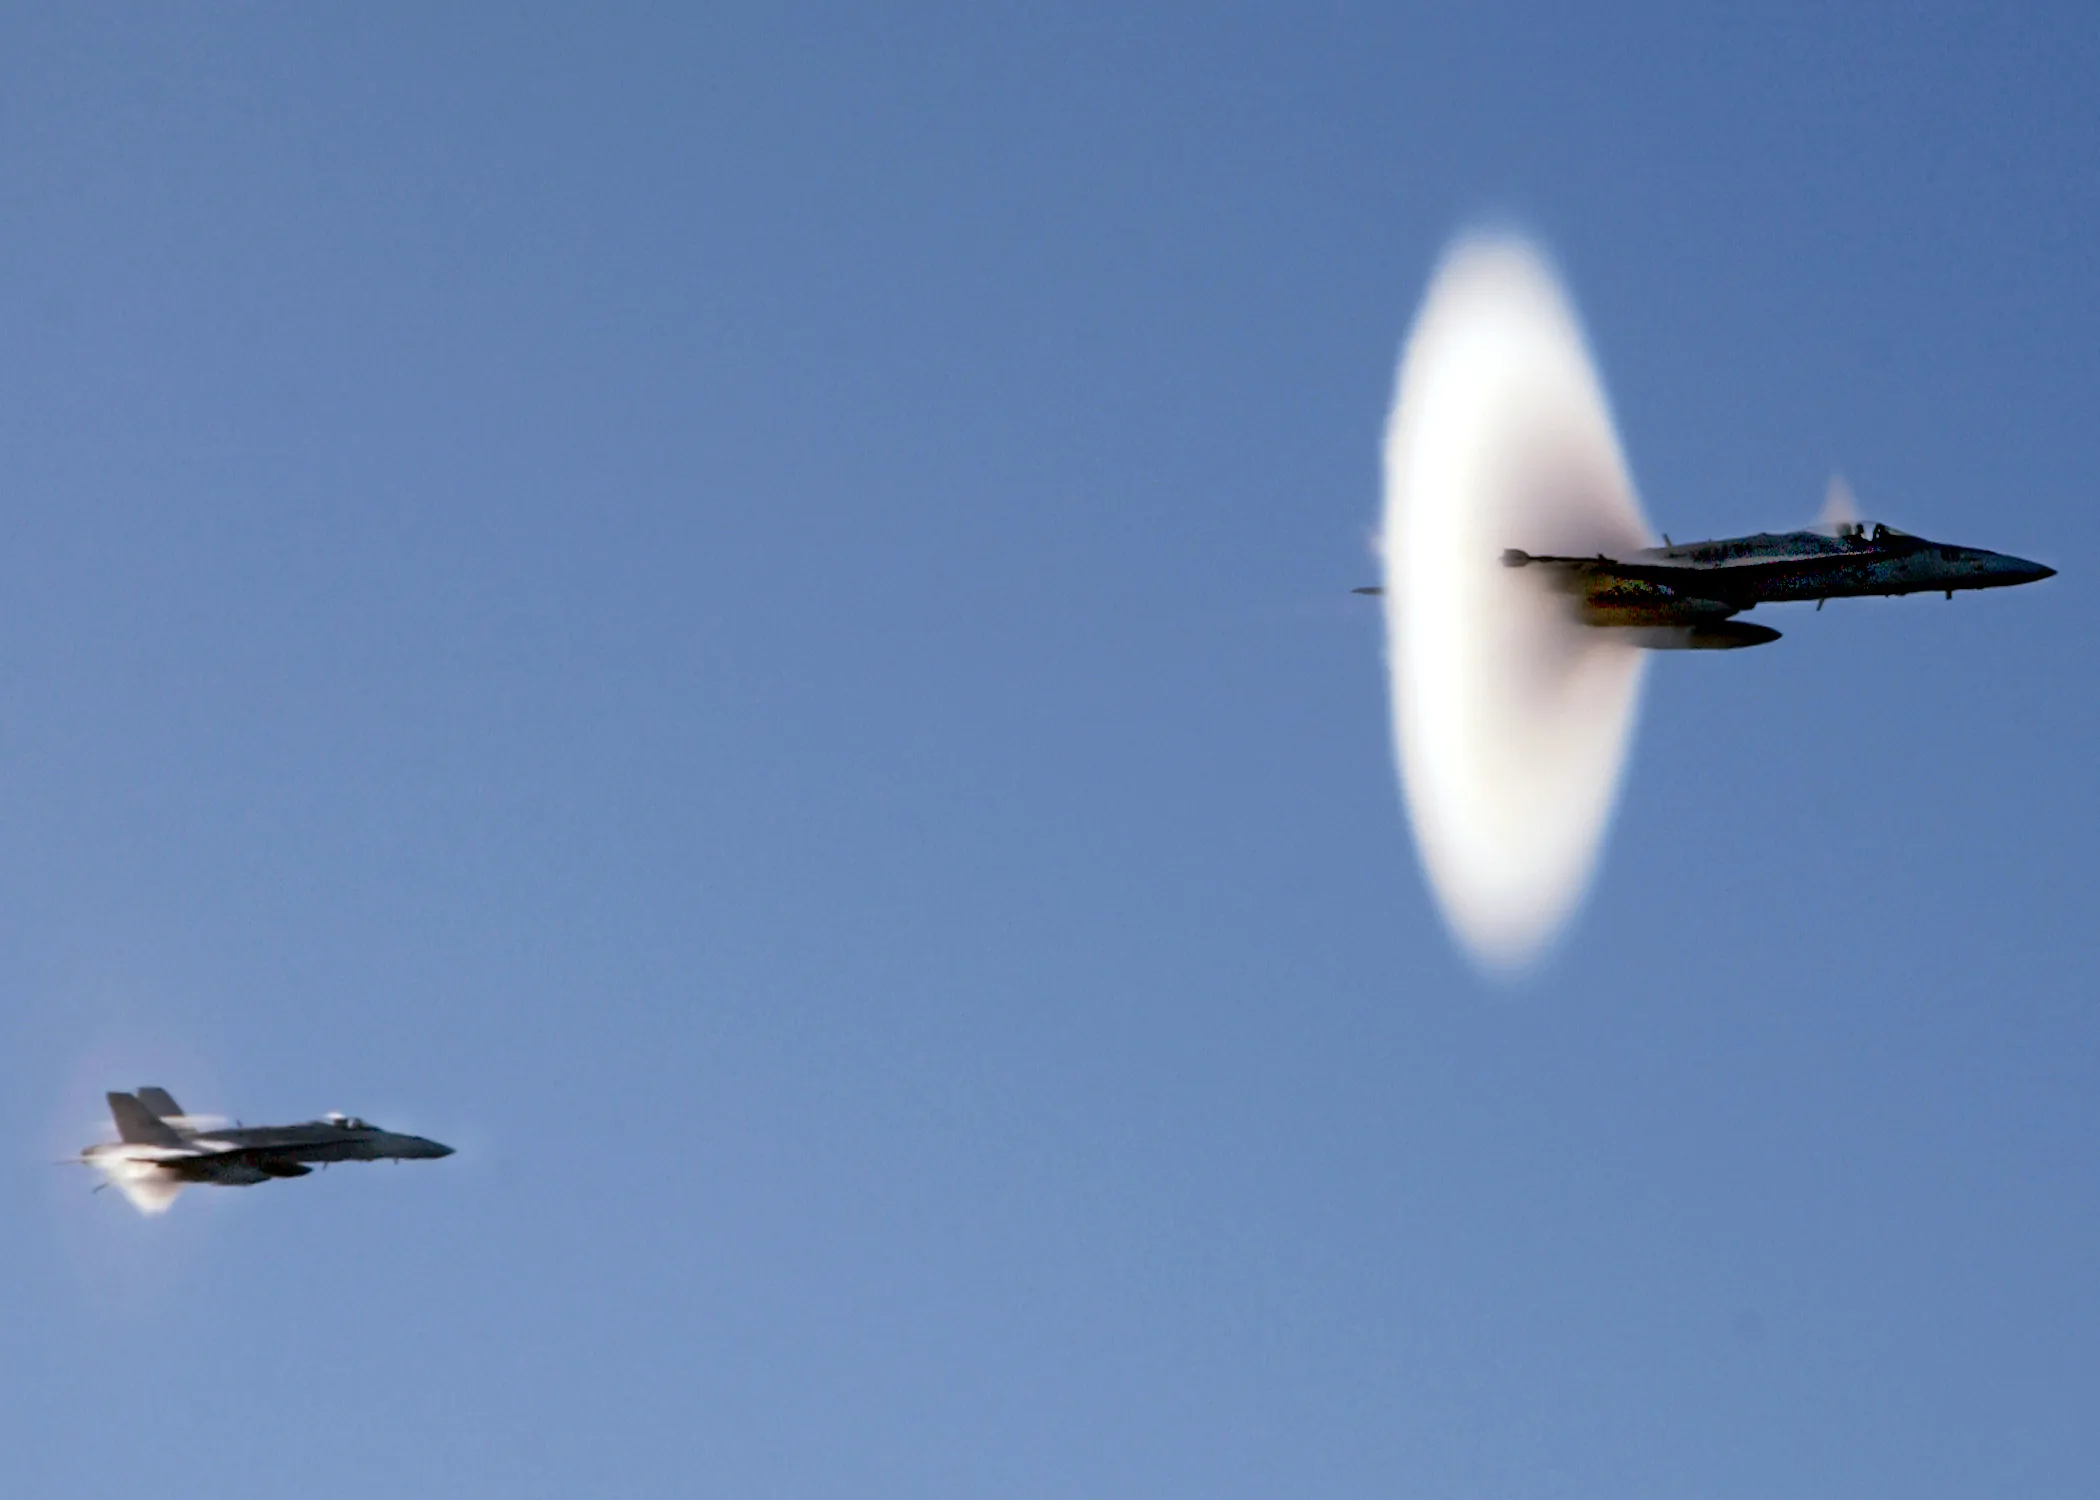 Supersonic aircraft breaking sound barrier